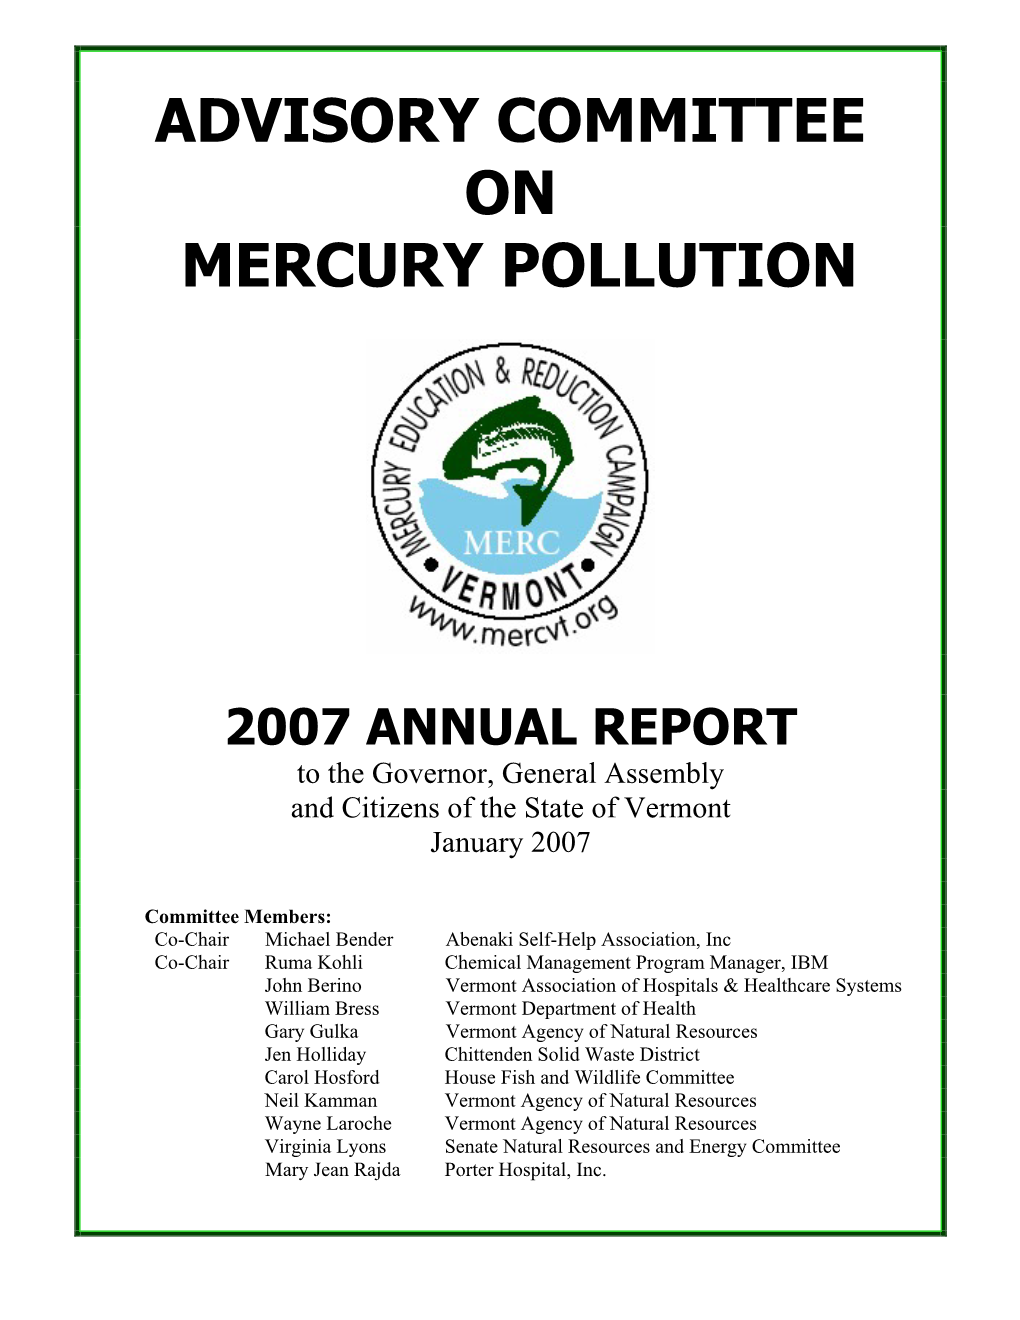 This Is the Sixth Annual Report of the Advisory